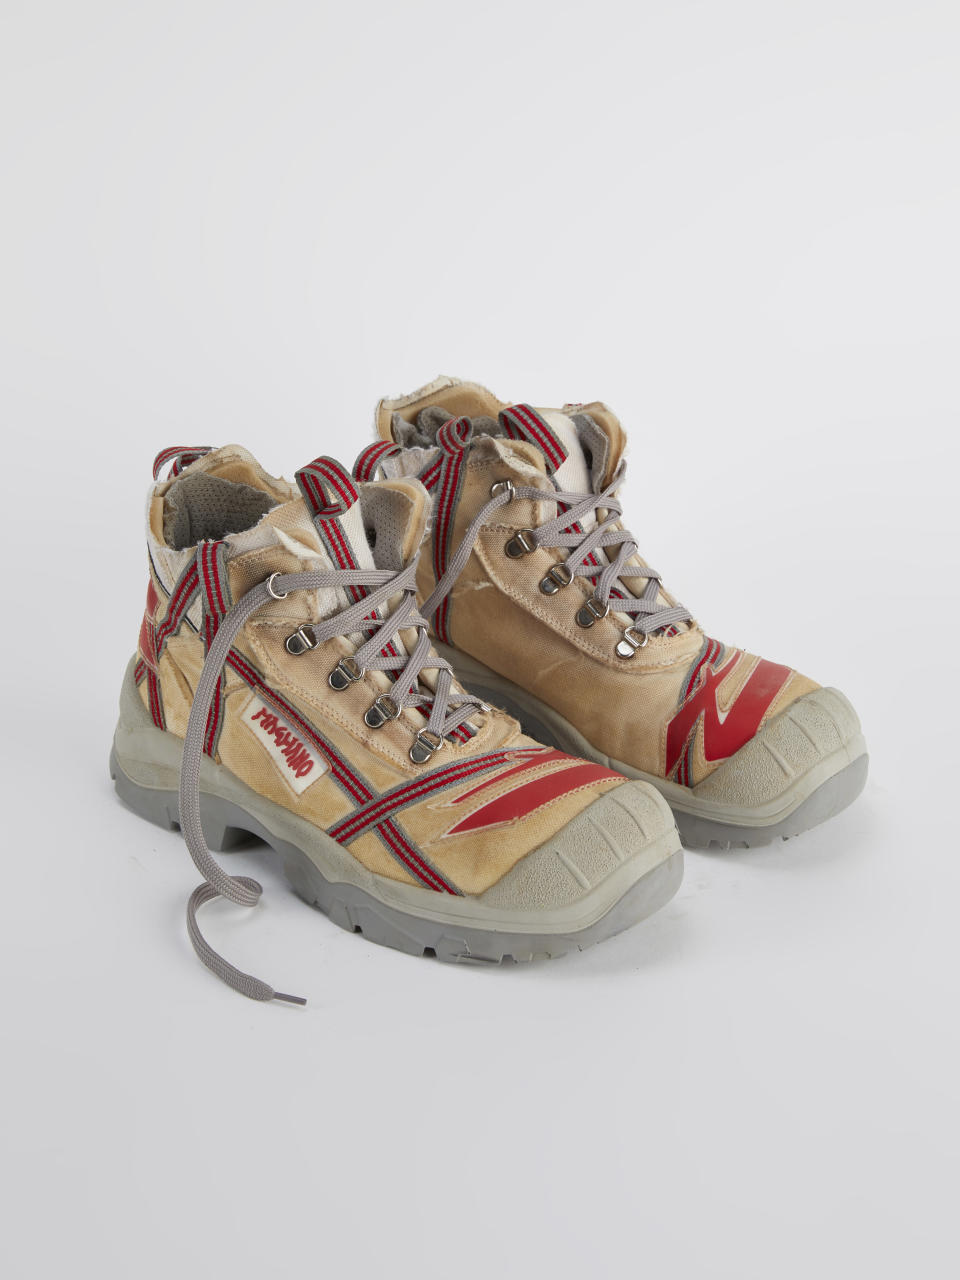 Magliano x U-Power Latitude, safety shoes, shoes